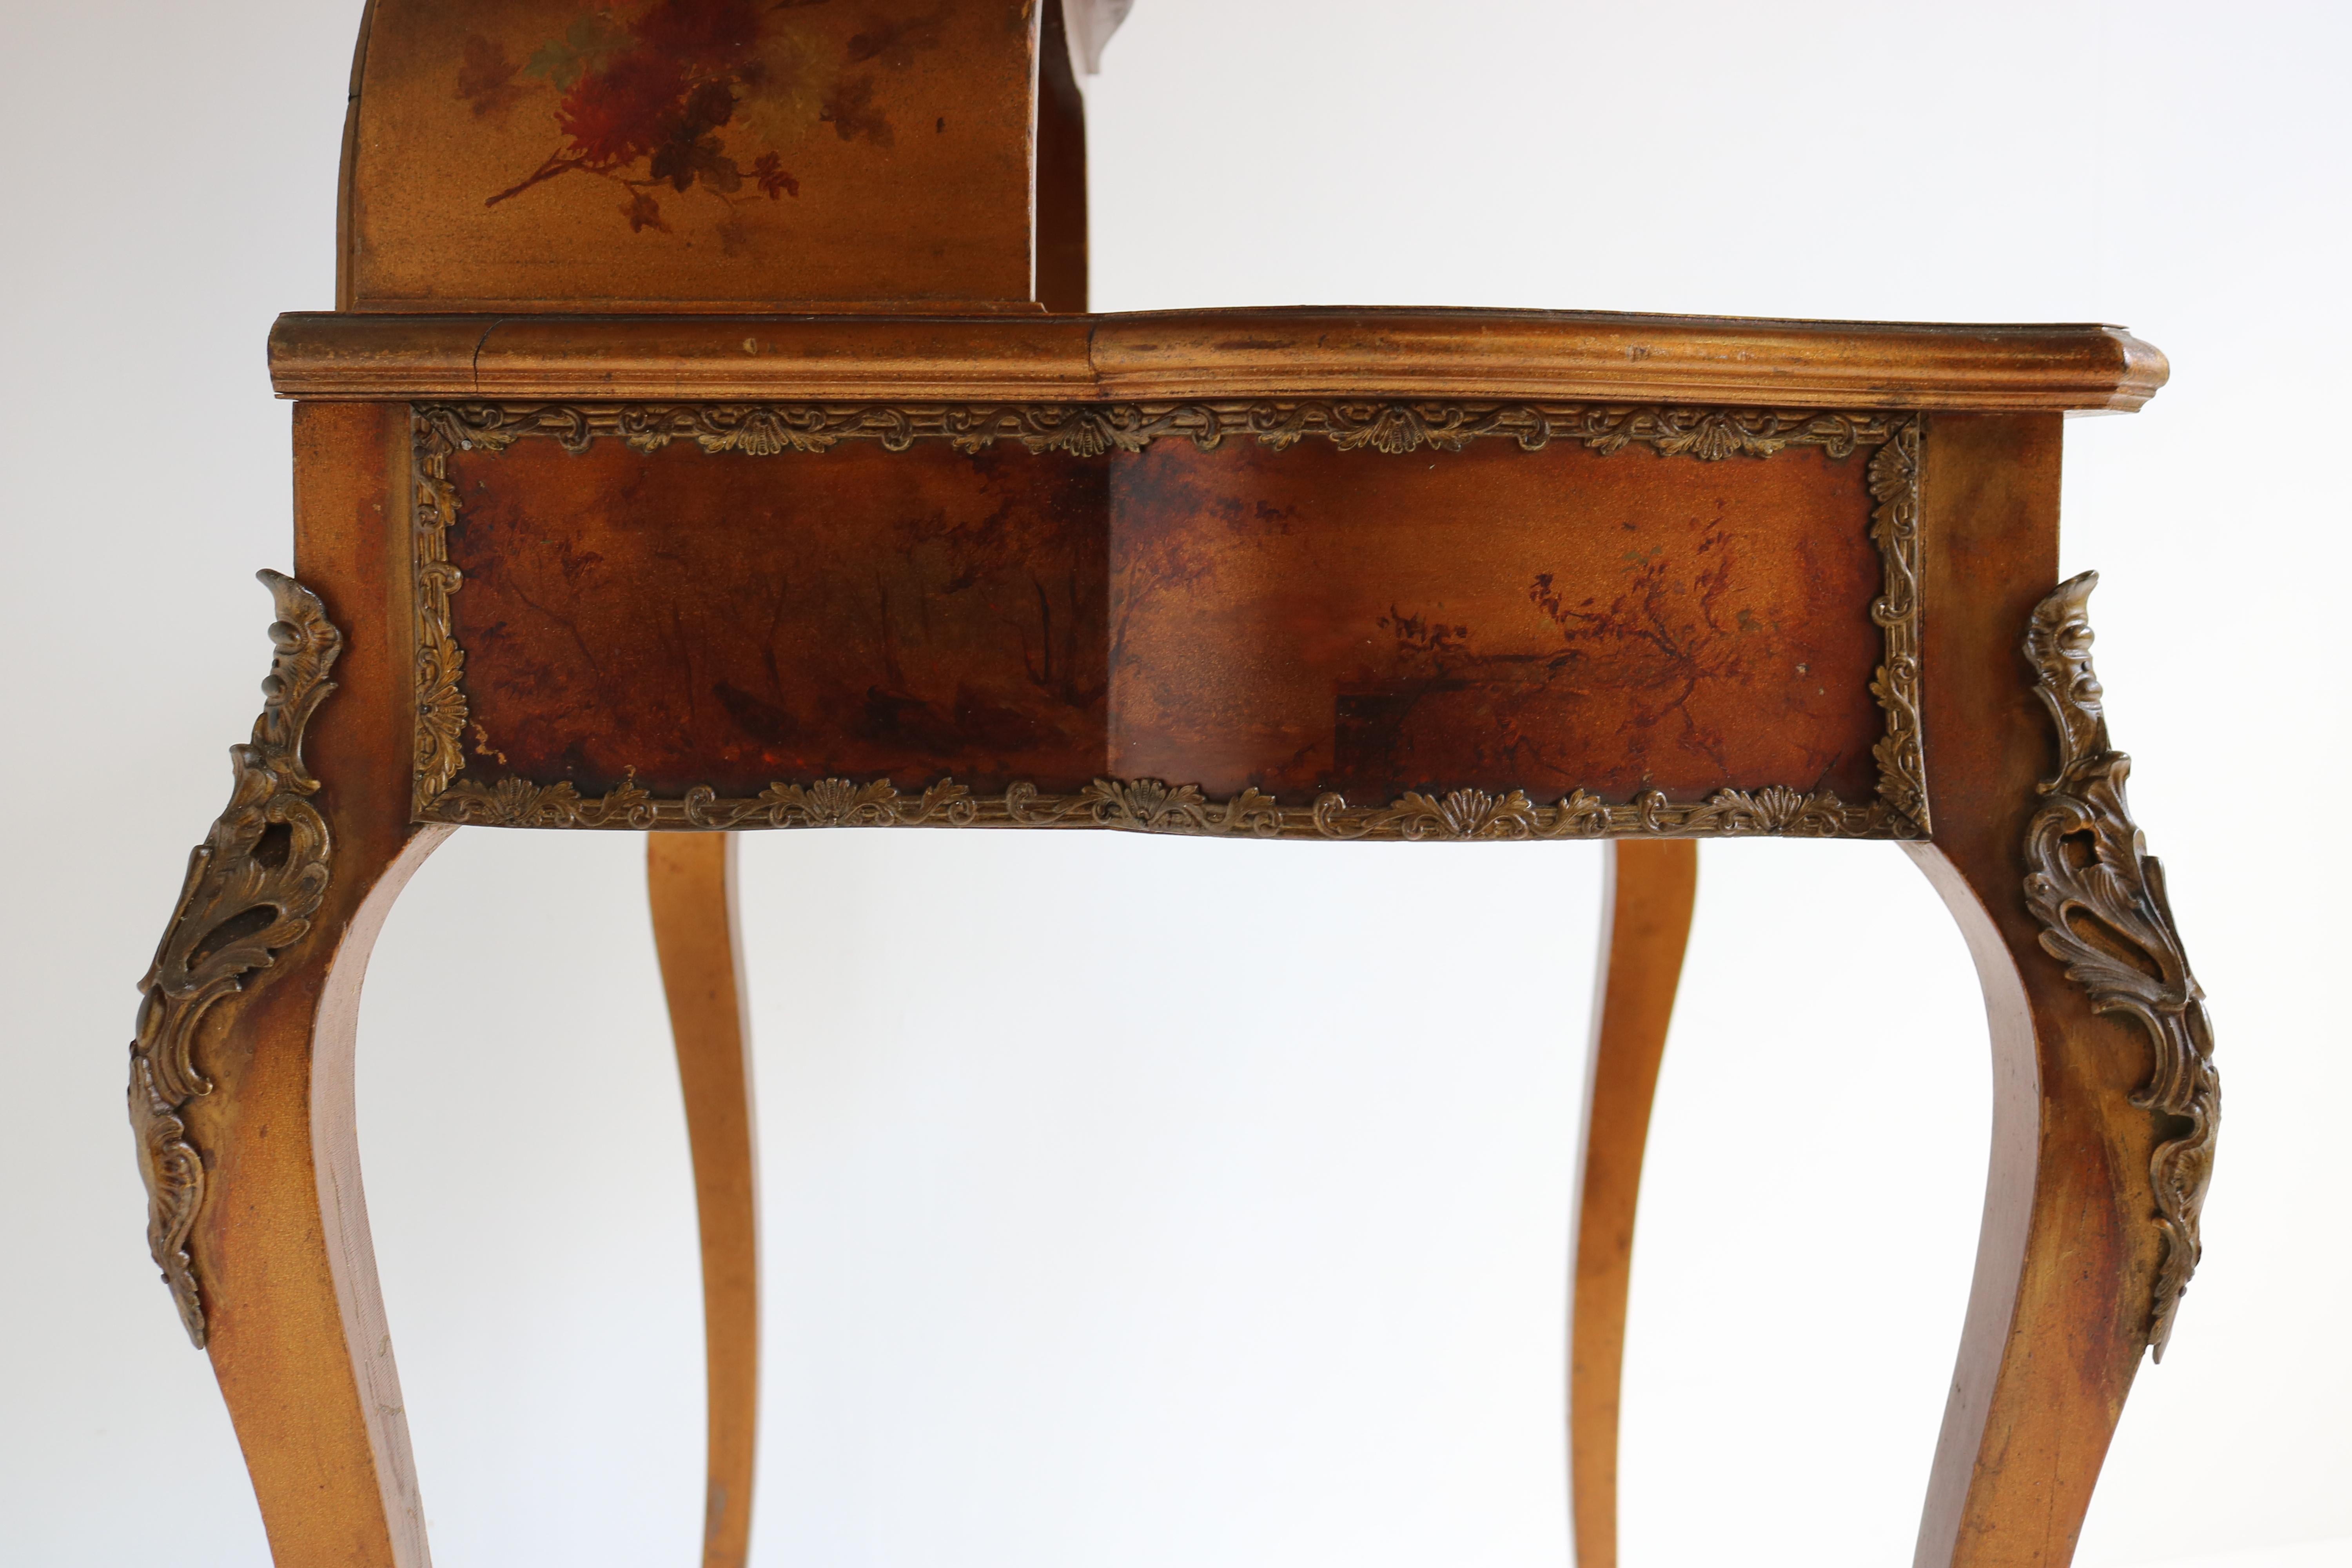 Italian Renaissance Dressing Table 19th Century Hand Painted by Müller Morten For Sale 2